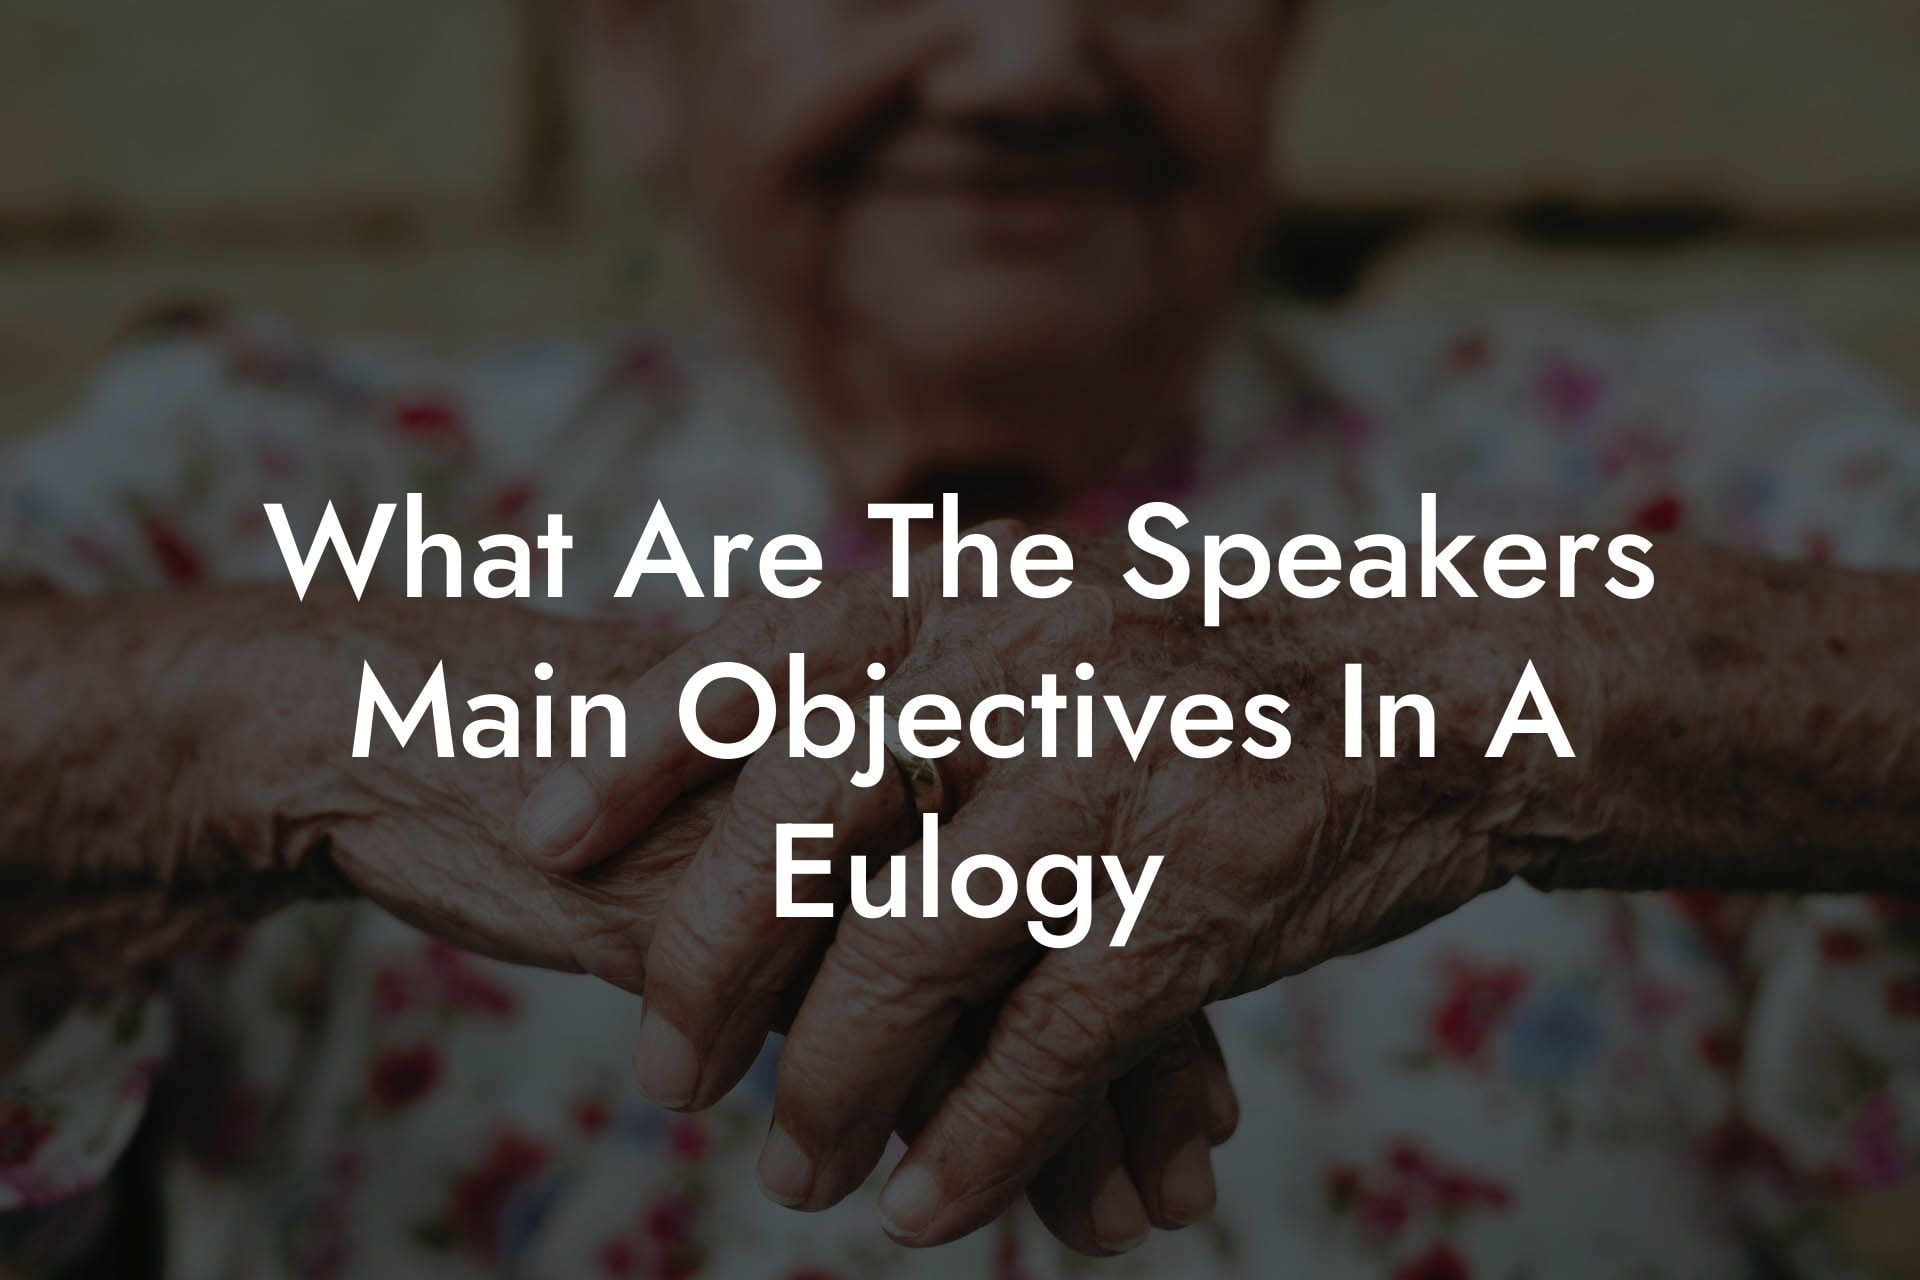 What Are The Speakers Main Objectives In A Eulogy